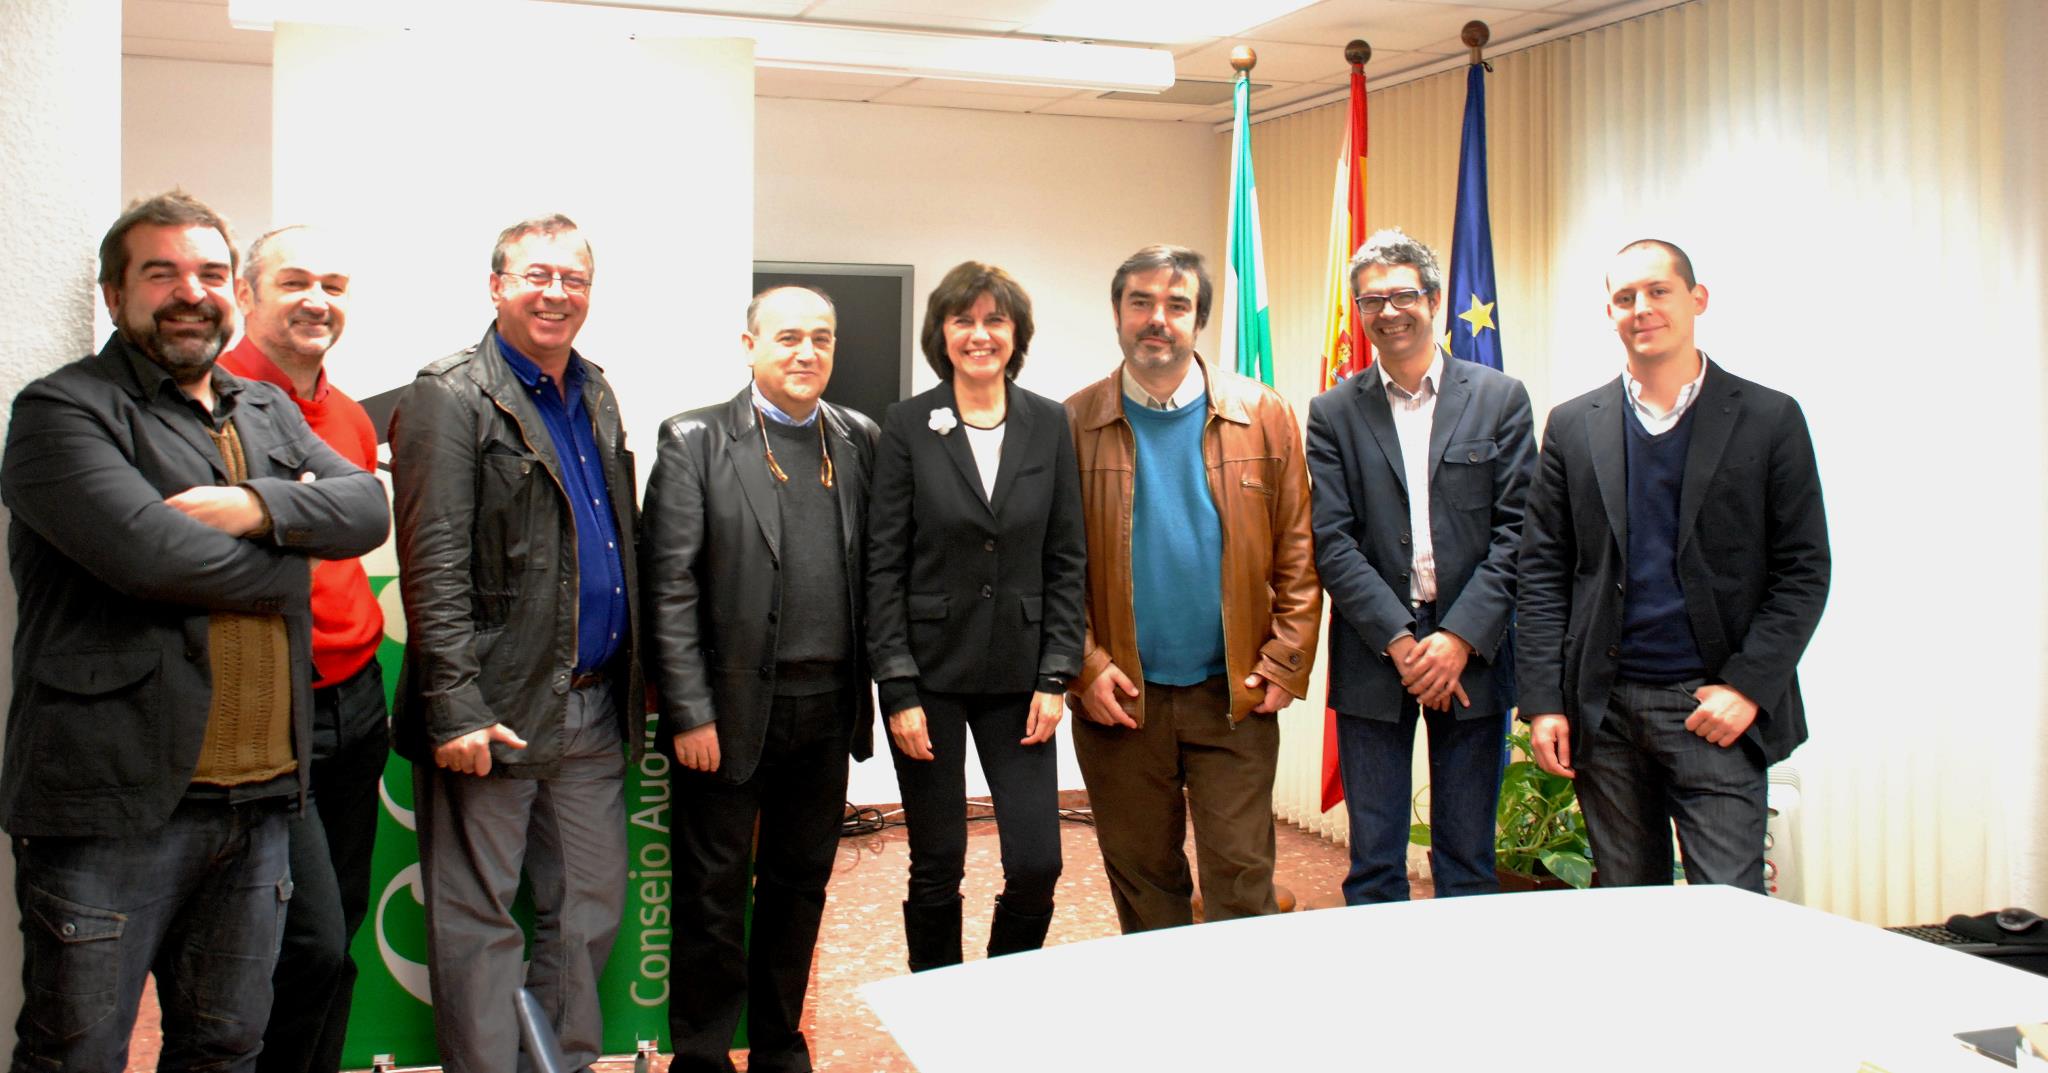 Andalusian producers meeting at the Consejo del Audiovisual Andaluz